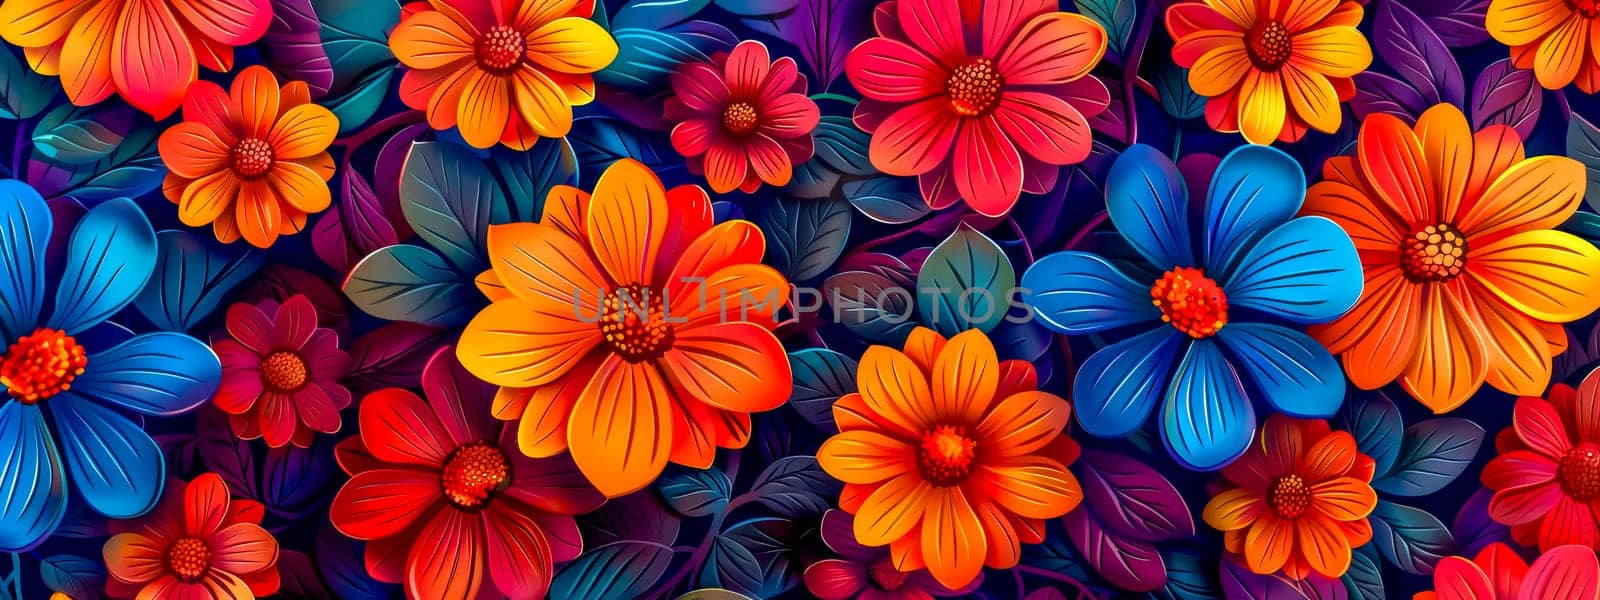 Seamless pattern of vivid, multi-colored flowers perfect for design use